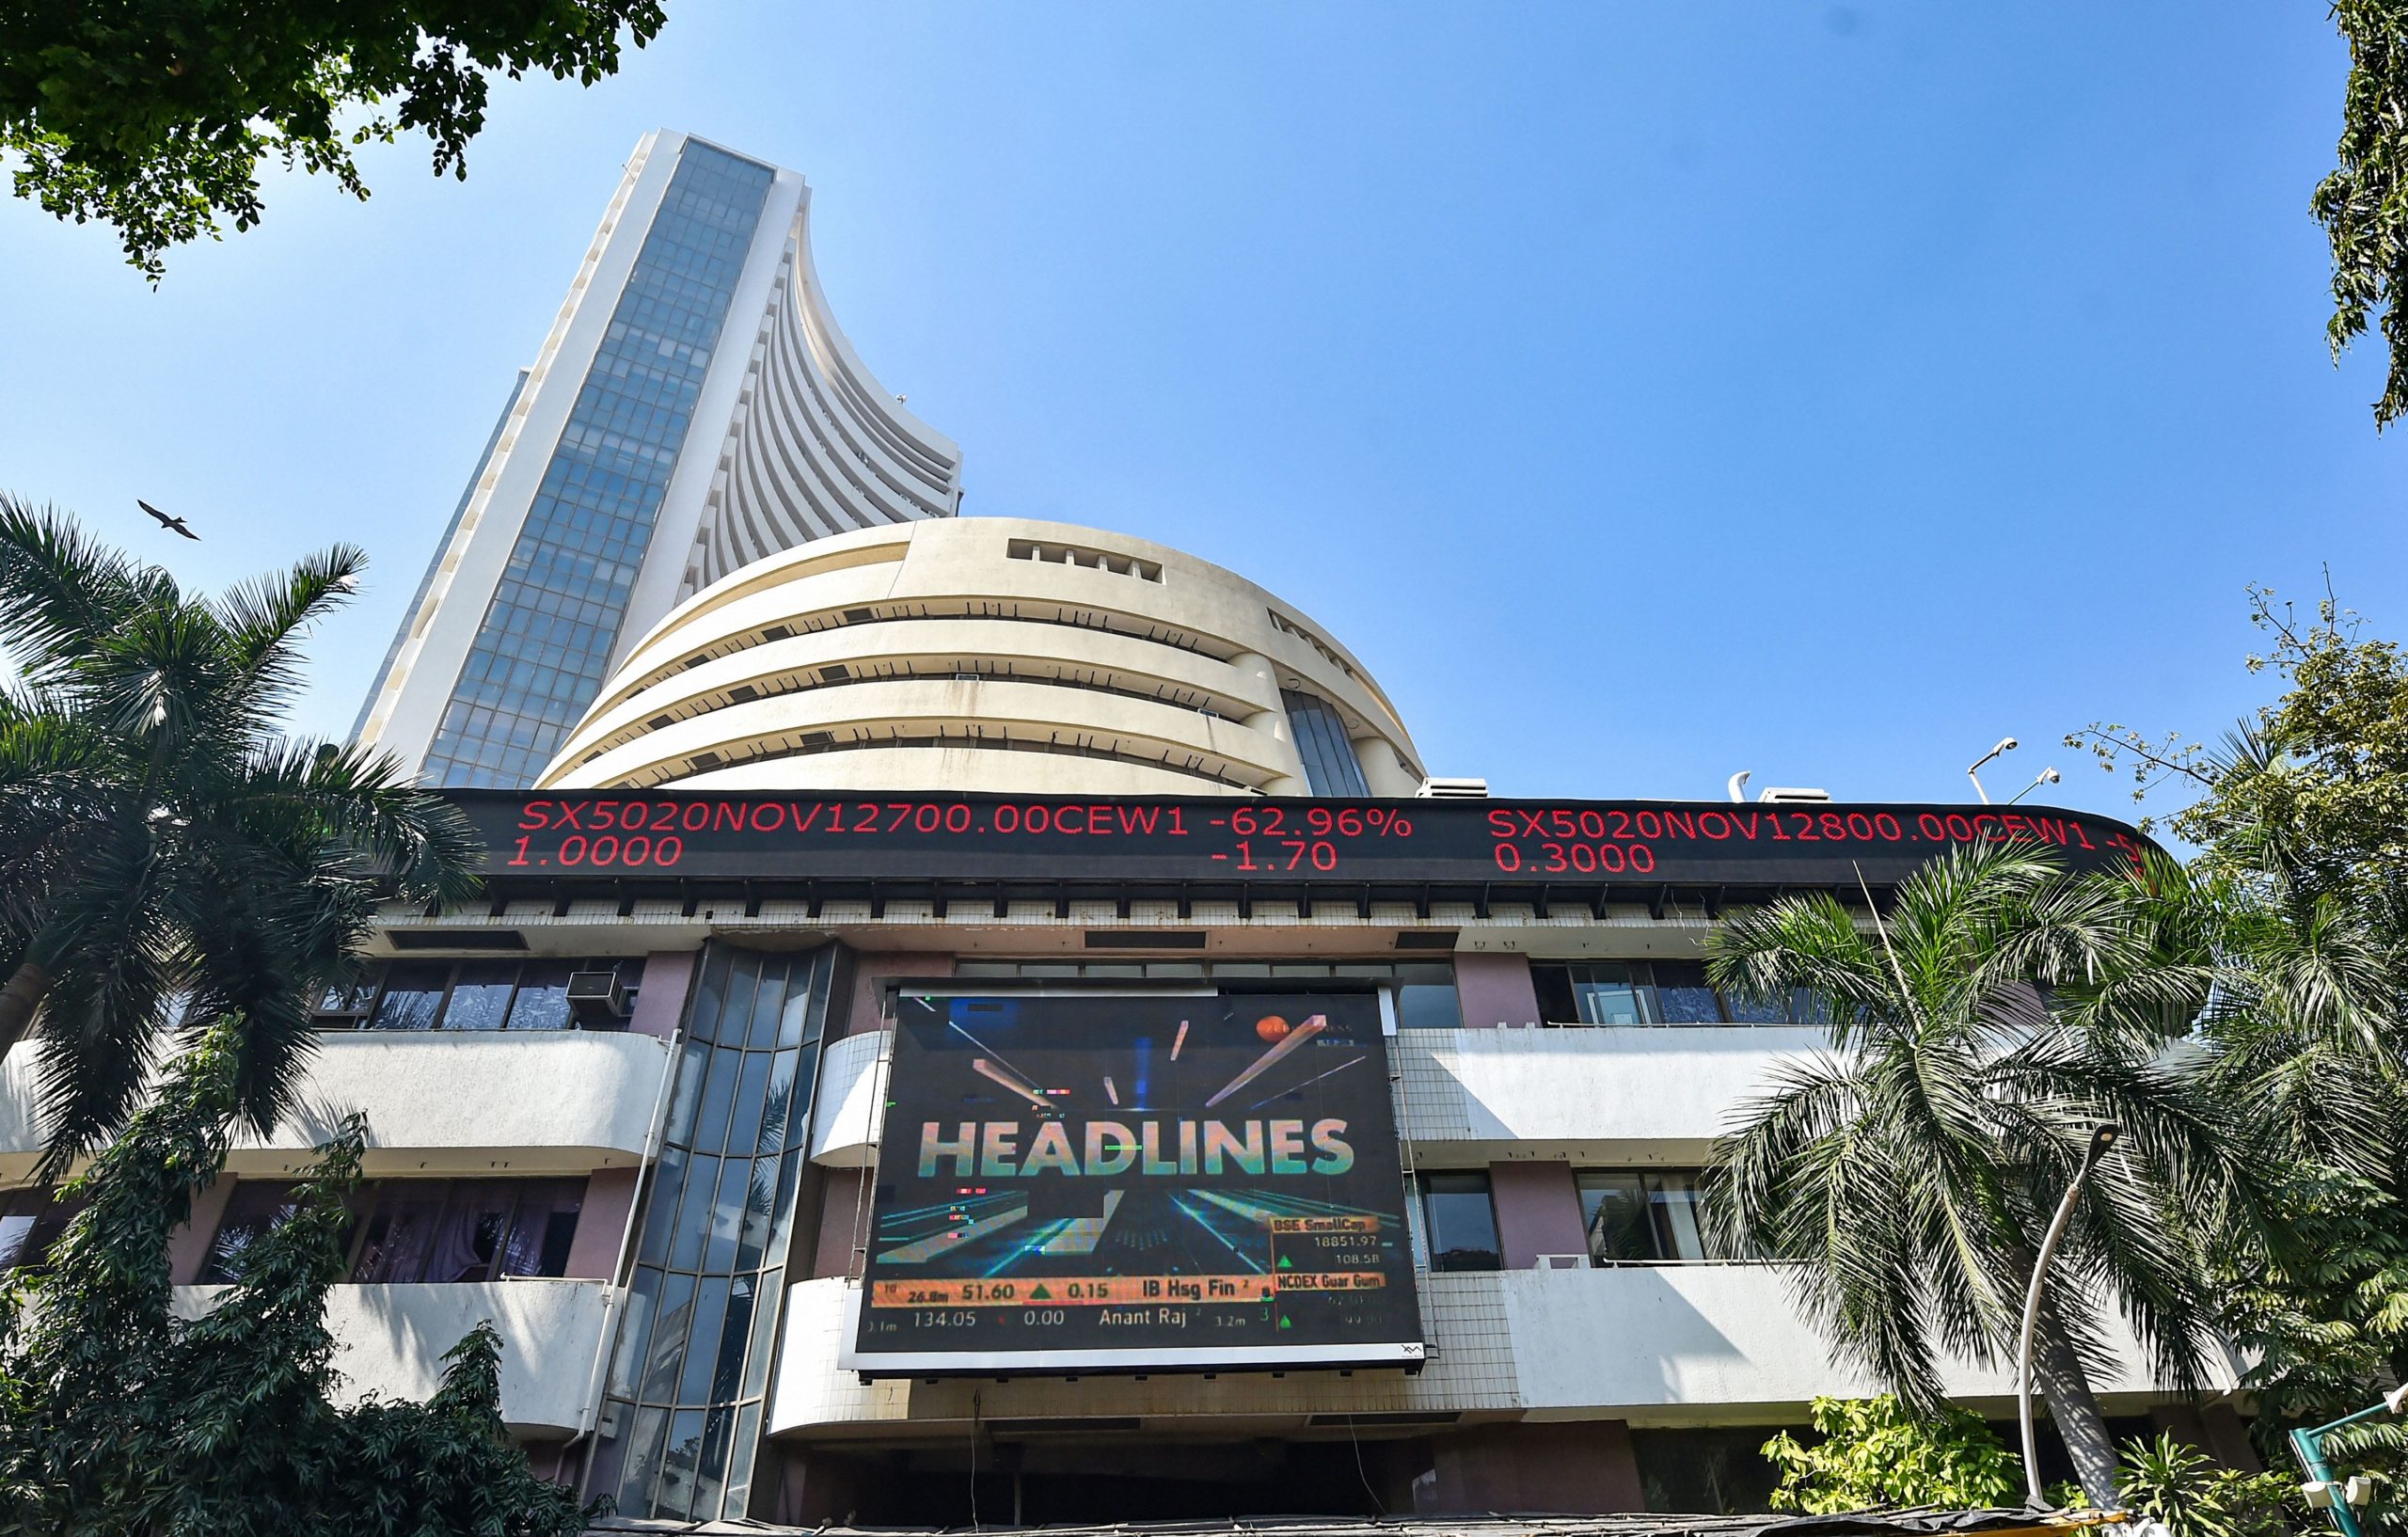 Trending Stocks: Bajaj Finance, ICICI, L&T, Network18, Tata and others in news today